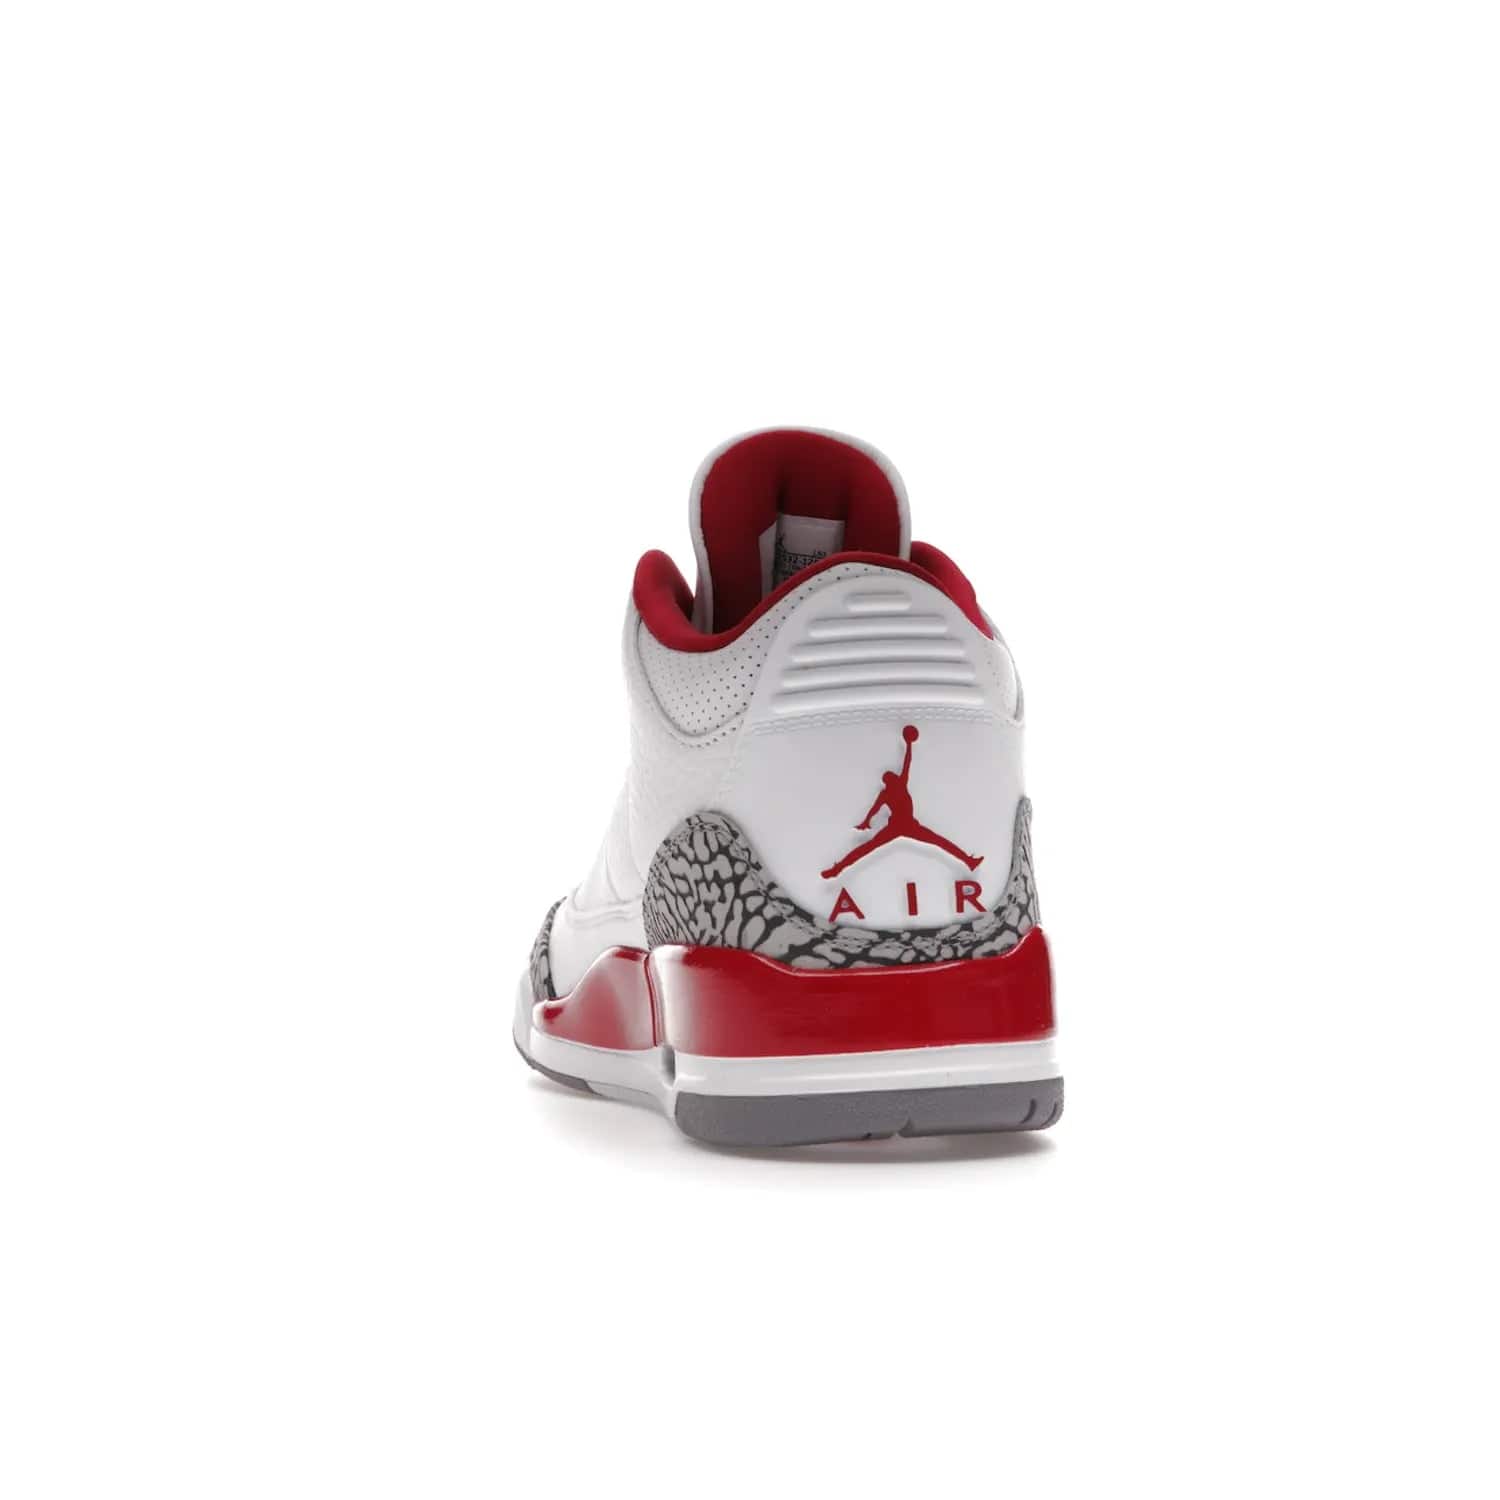 Jordan 3 Retro Cardinal Red - Image 27 - Only at www.BallersClubKickz.com - Air Jordan 3 Retro Cardinal Red combines classic style and modern appeal - white tumbled leather, signature Elephant Print overlays, cardinal red midsoles, Jumpman logo embroidery. Available Feb 2022.